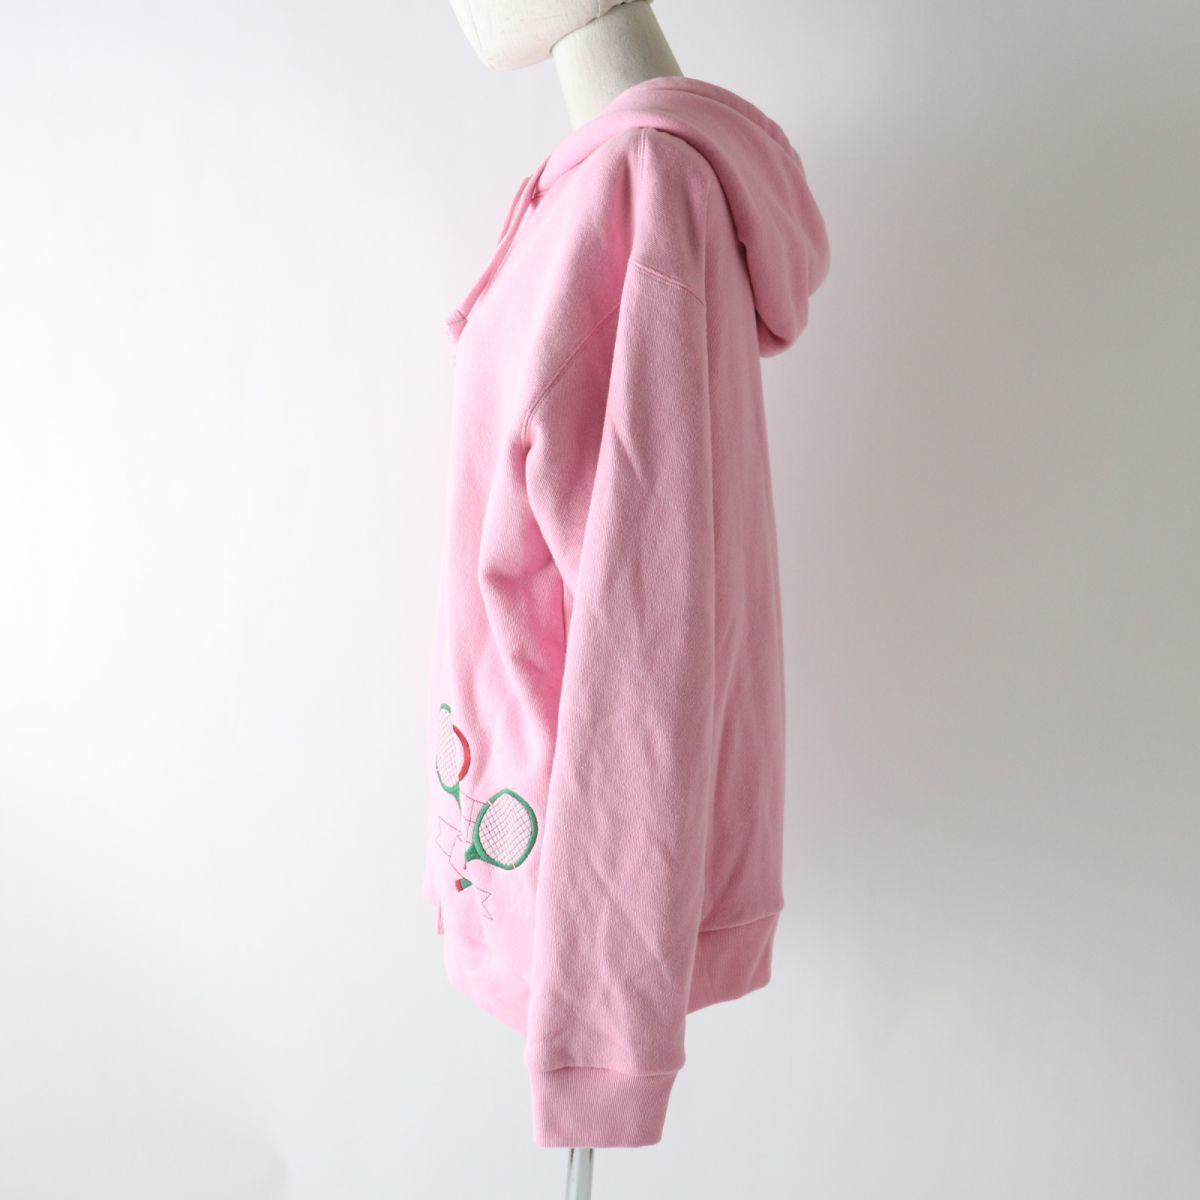  unused * regular goods Gucci 572808 19AW tennis embroidery entering Logo button attaching lining total pattern * silk 100%embro Ida Lee Parker pink M made in Italy tag attaching 